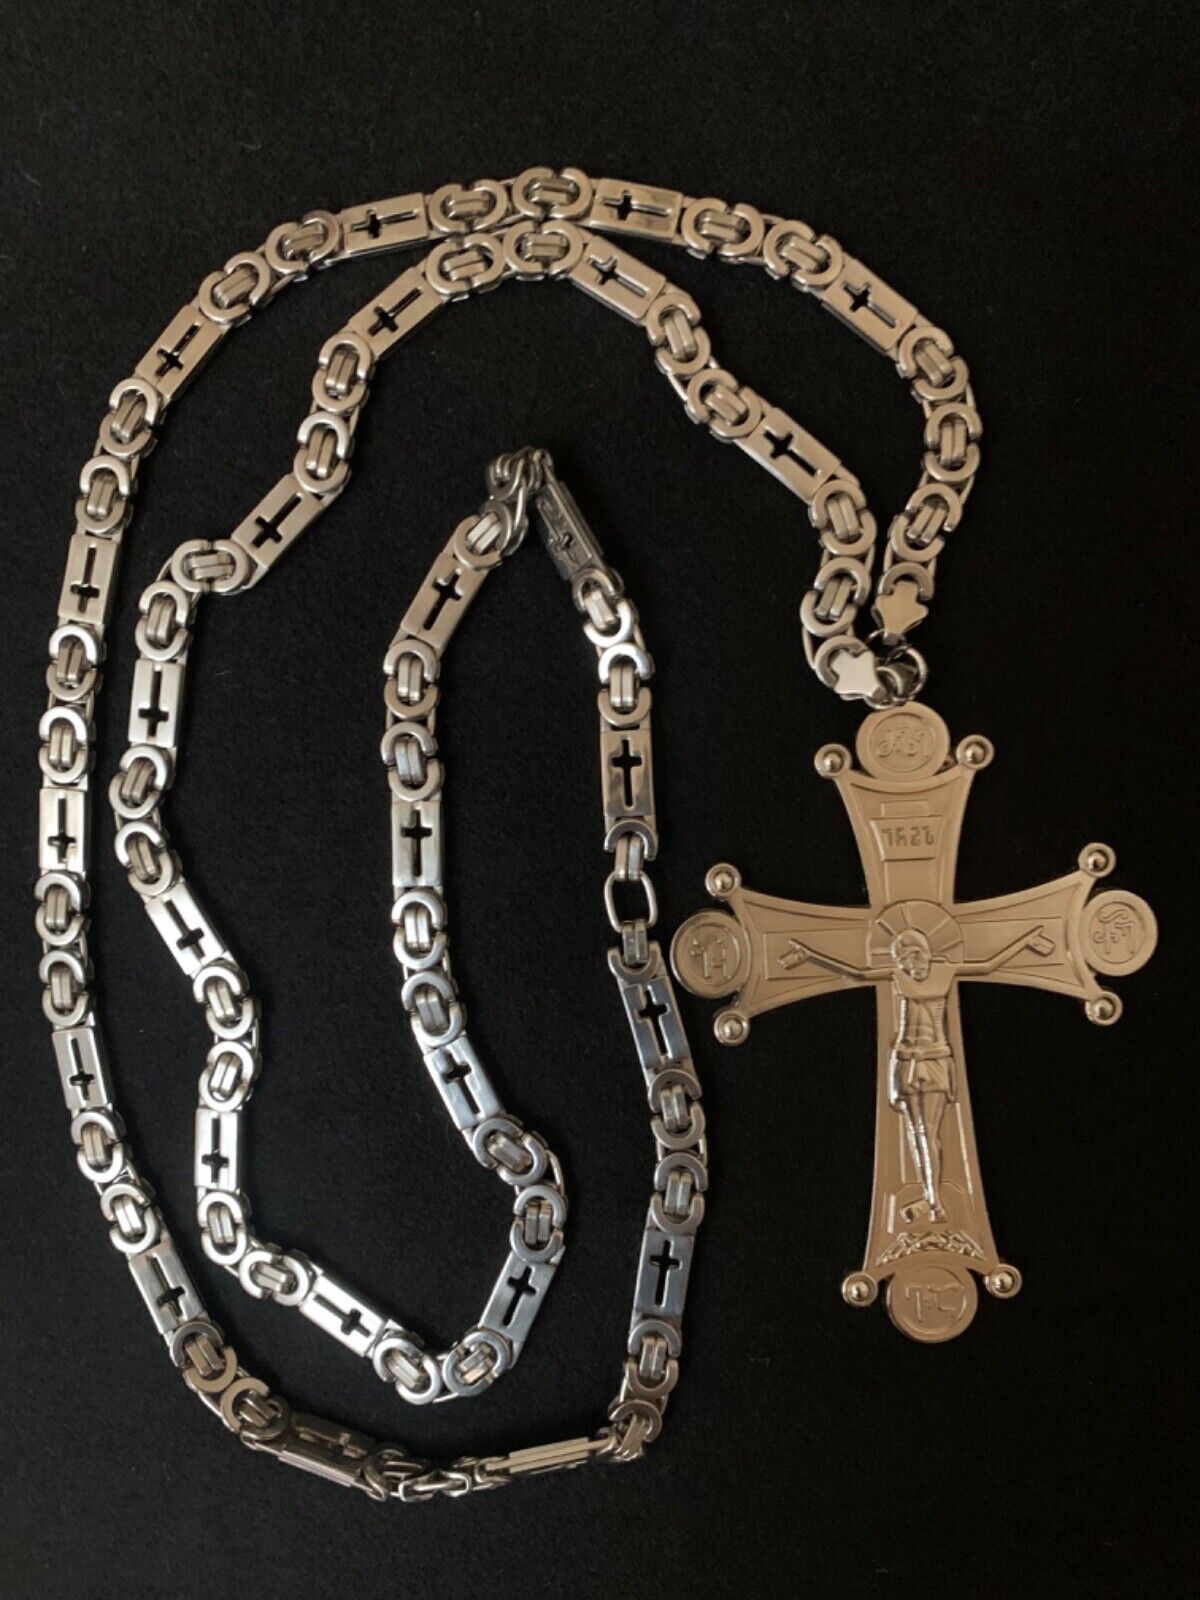 Christian Orthodox priest pectoral silverplated cross with chain